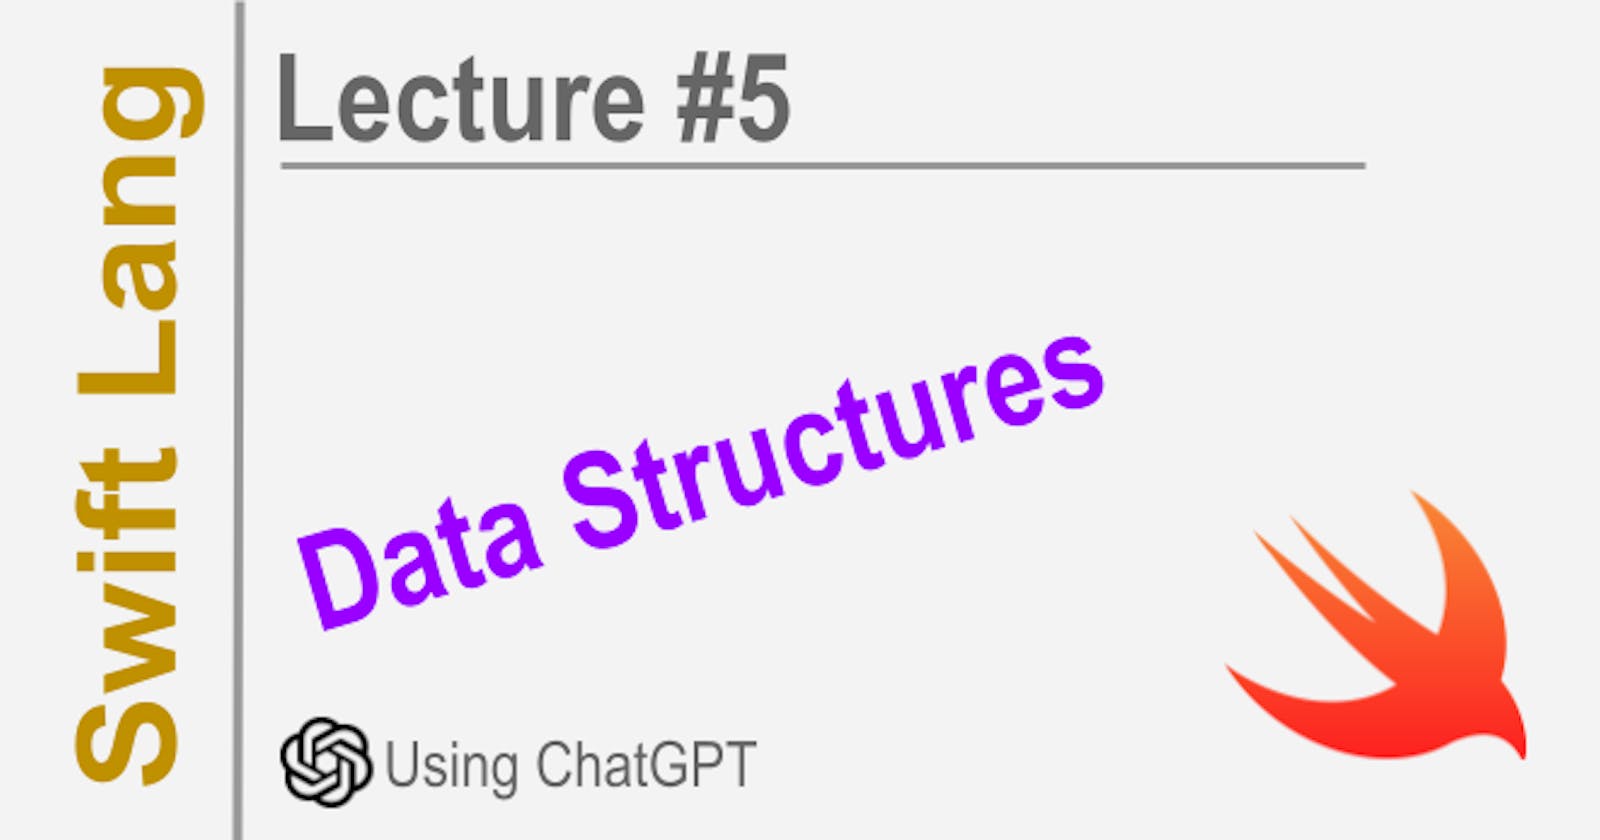 Swift: Data Structures